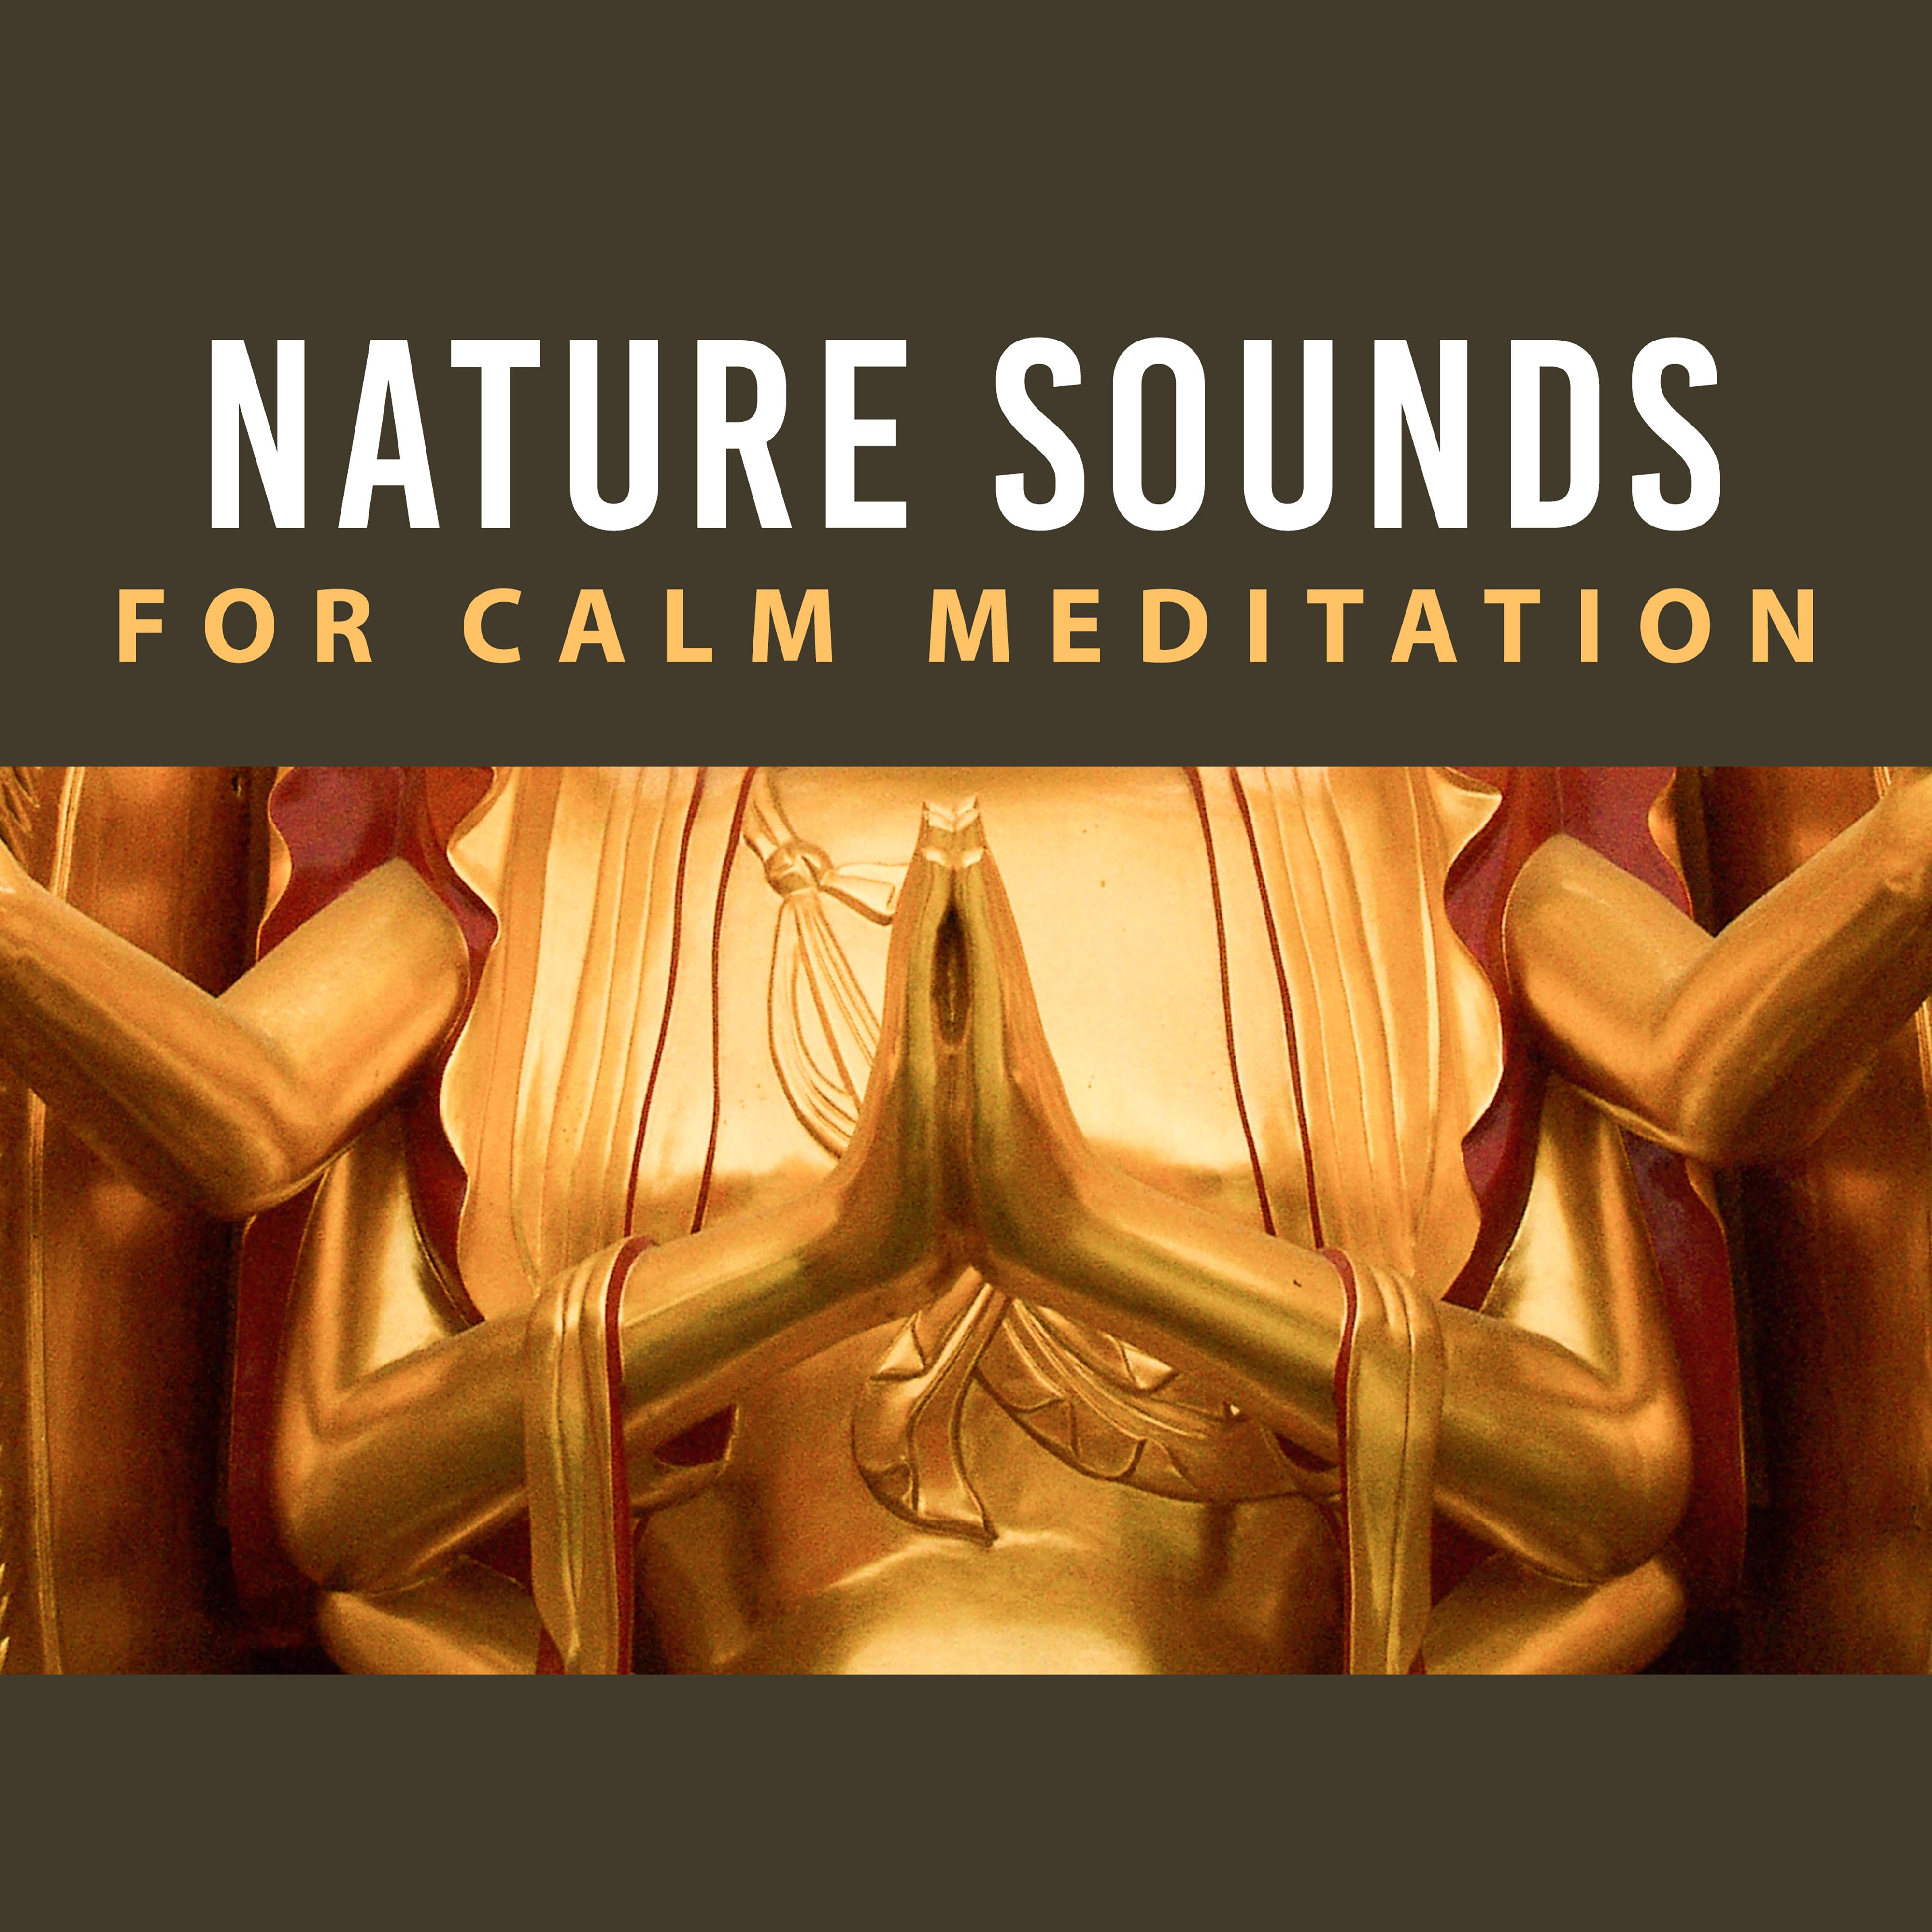 Nature Sounds for Calm Meditation – Relax with New Age, Soothing Sounds, Meditation & Relaxation, Soft Music